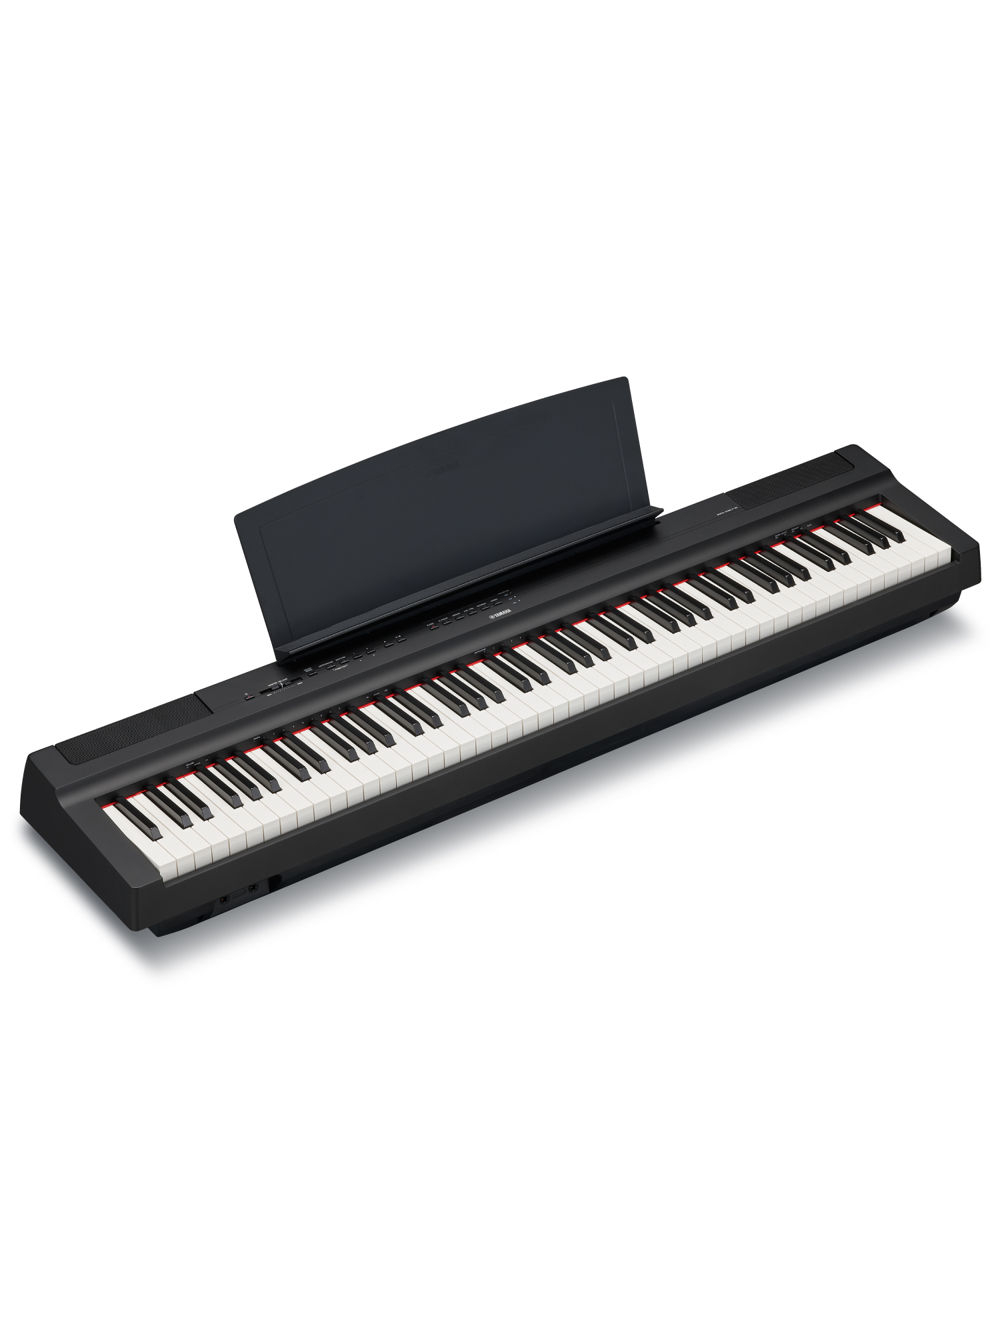 Yamaha P-125B Digital Piano With 88 Keys Online Store In India